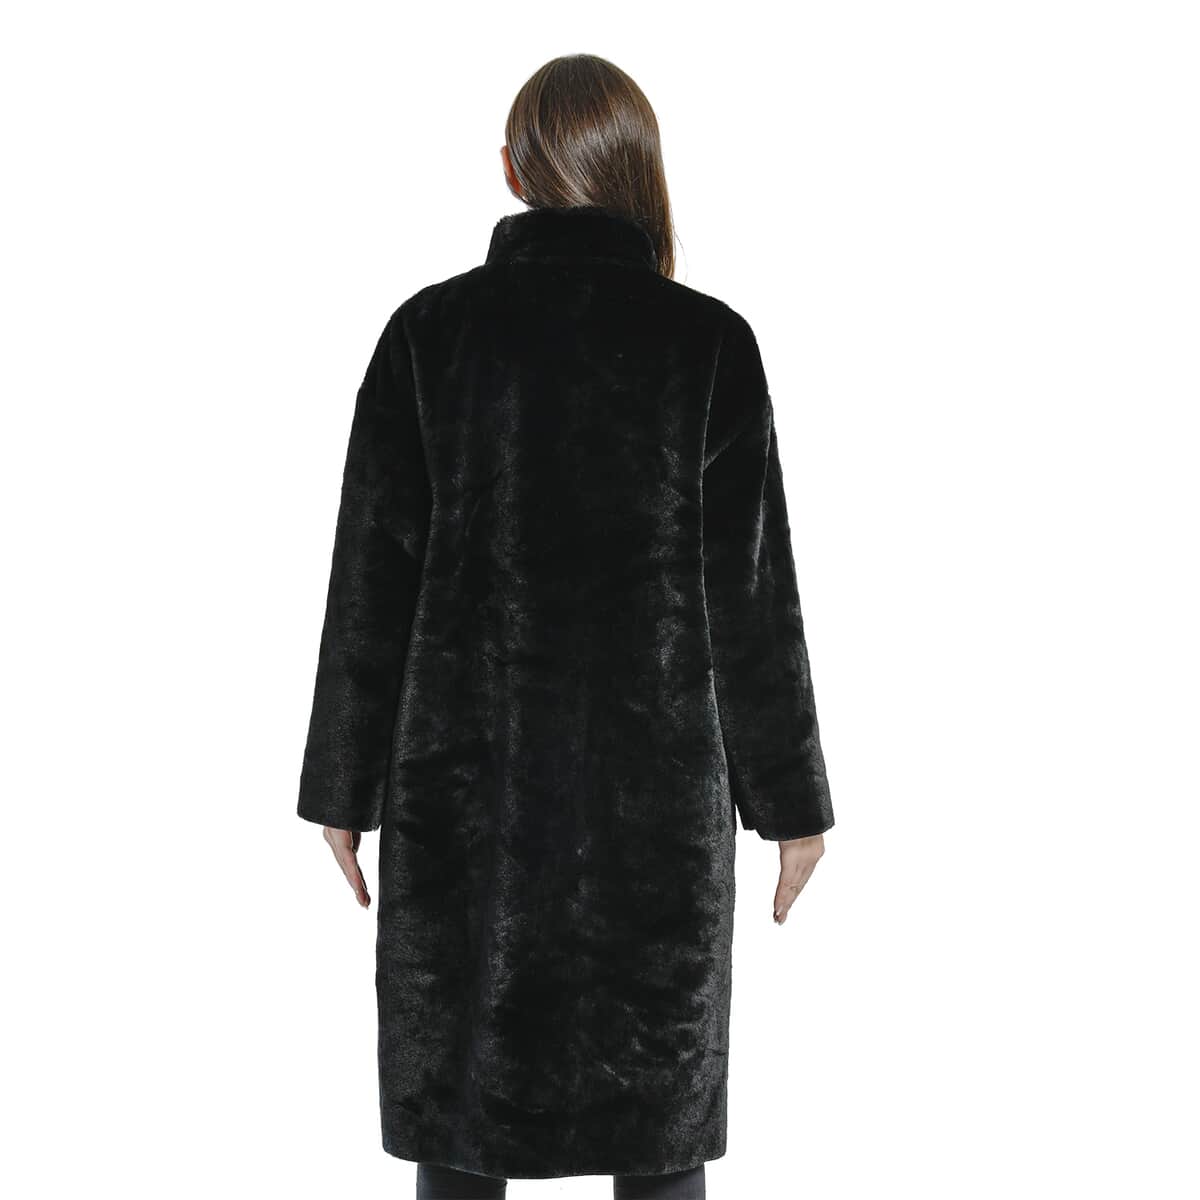 TAMSY Black Suede and Polyester Faux Fur Long Coat - L (L43"xW48") image number 1